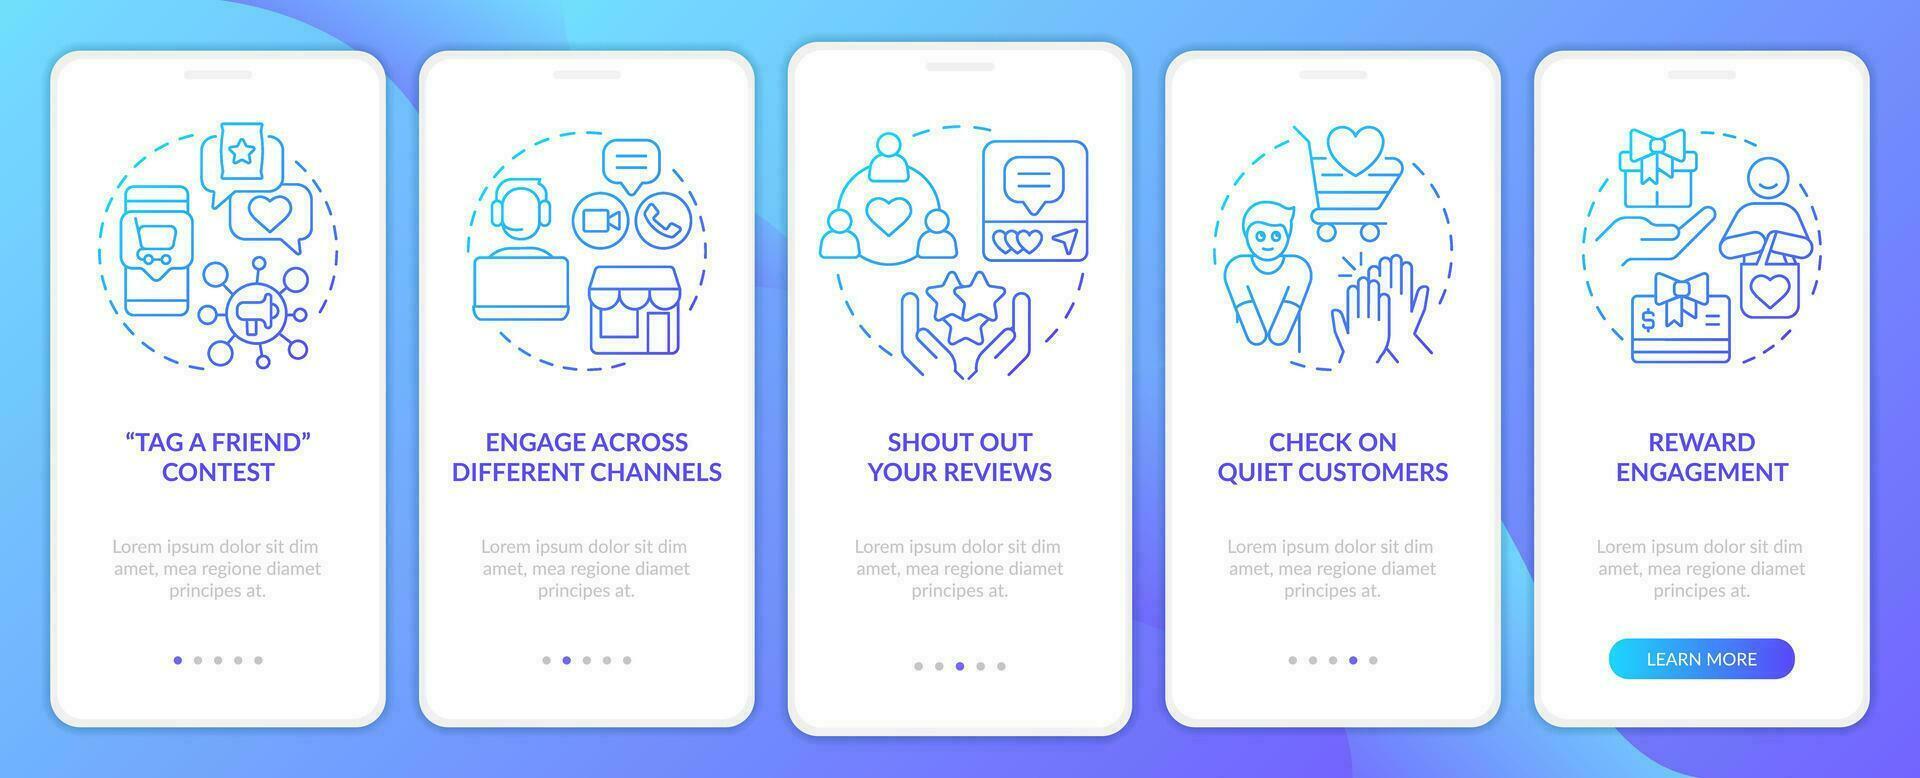 Customer engagement strategies blue gradient onboarding mobile app screen. Walkthrough 5 steps graphic instructions with linear concepts. UI, UX, GUI templated vector